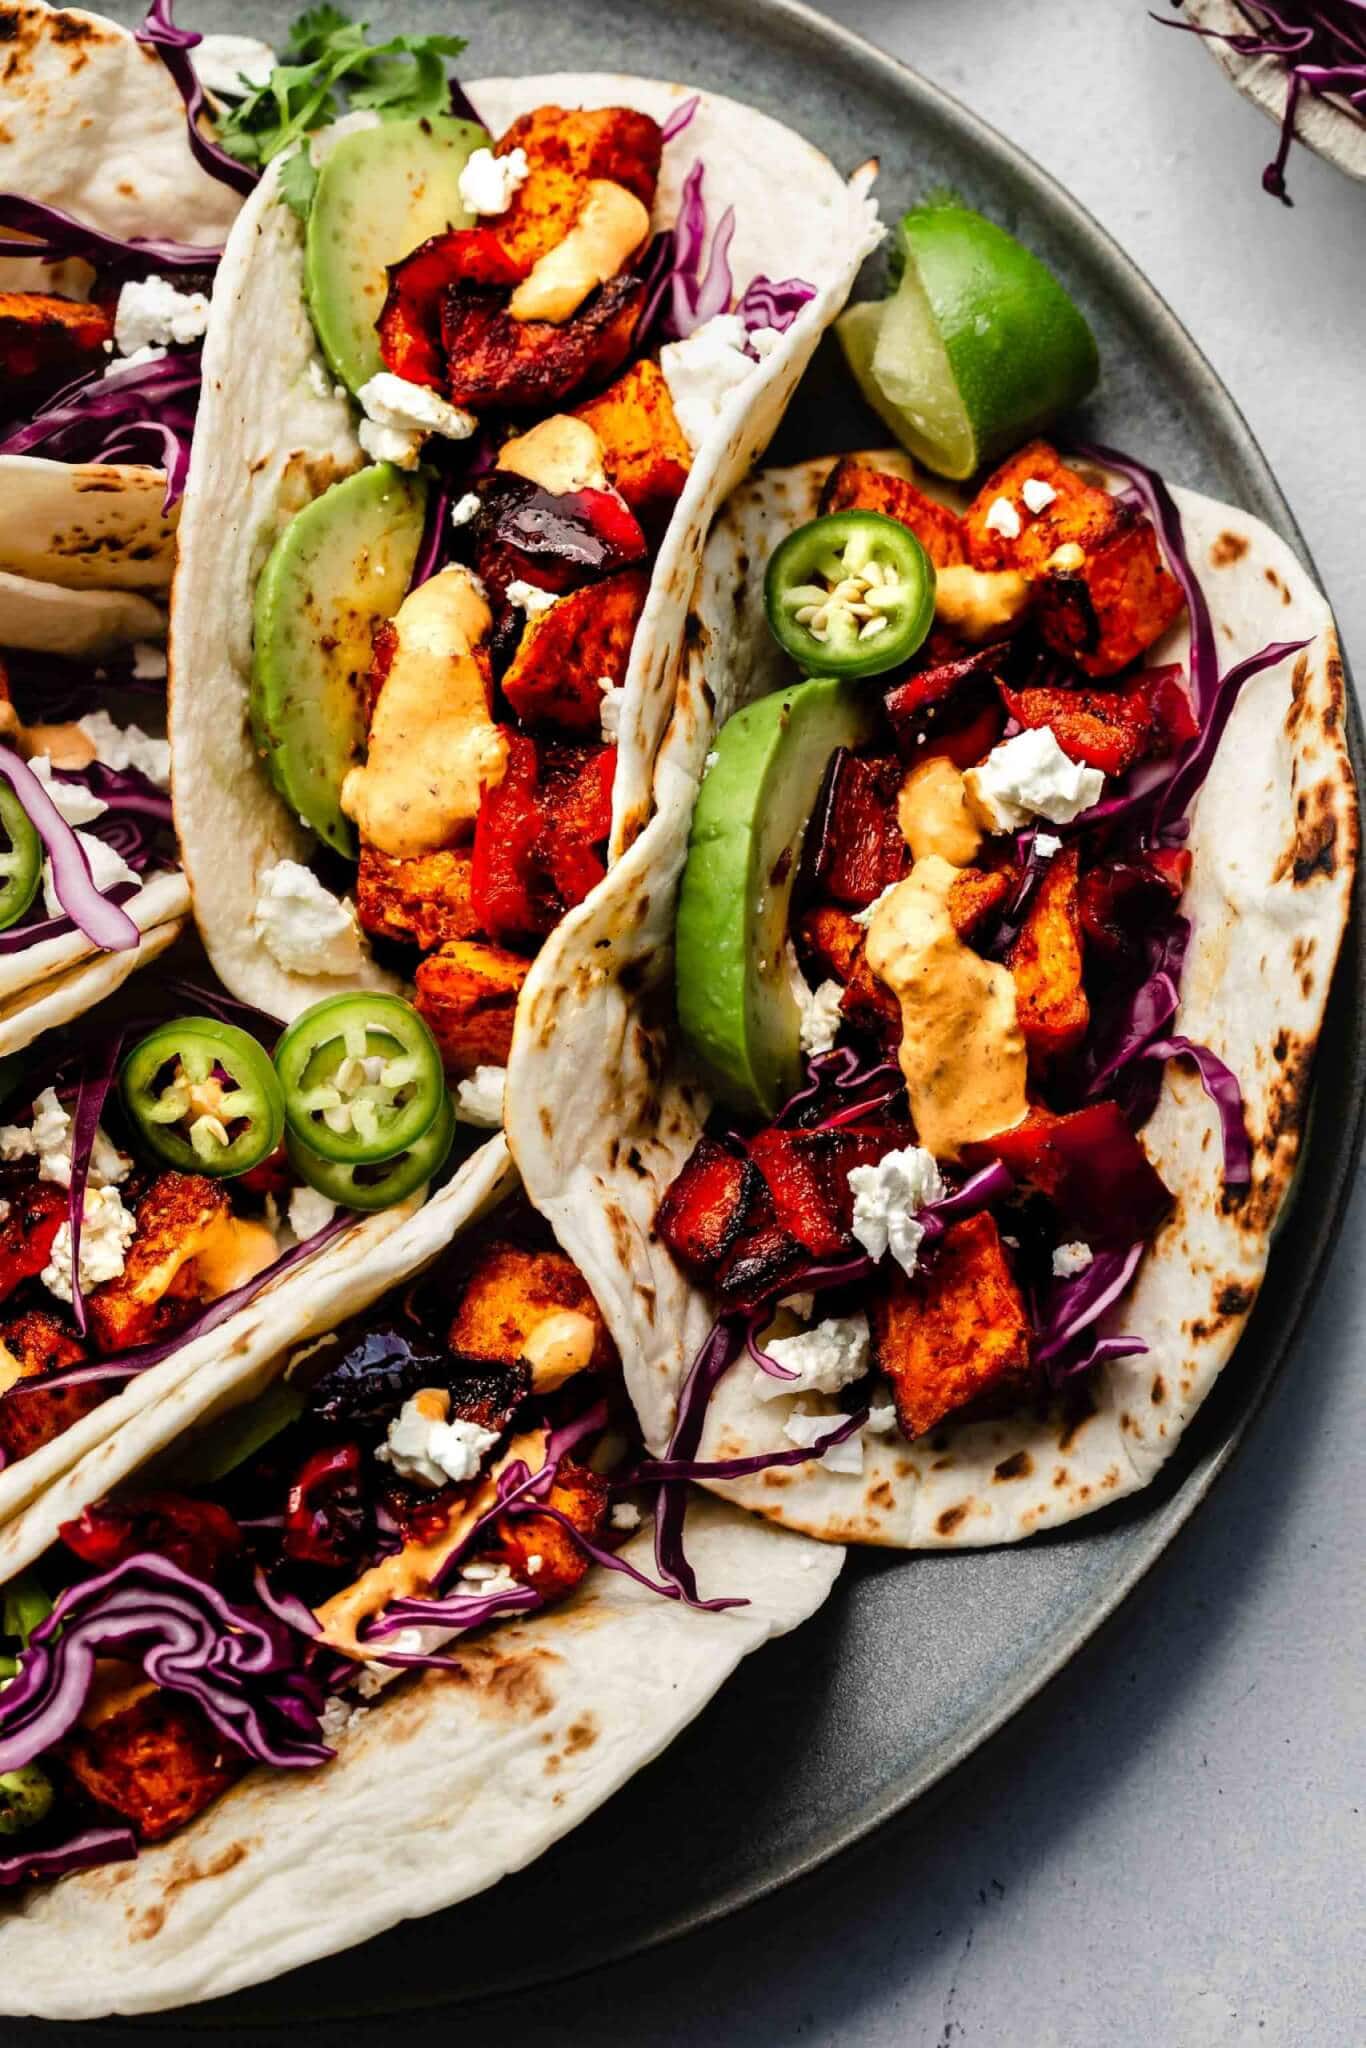 SWEET POTATO TACOS ARRANGED ON PLATE WITH TOPPINGS.